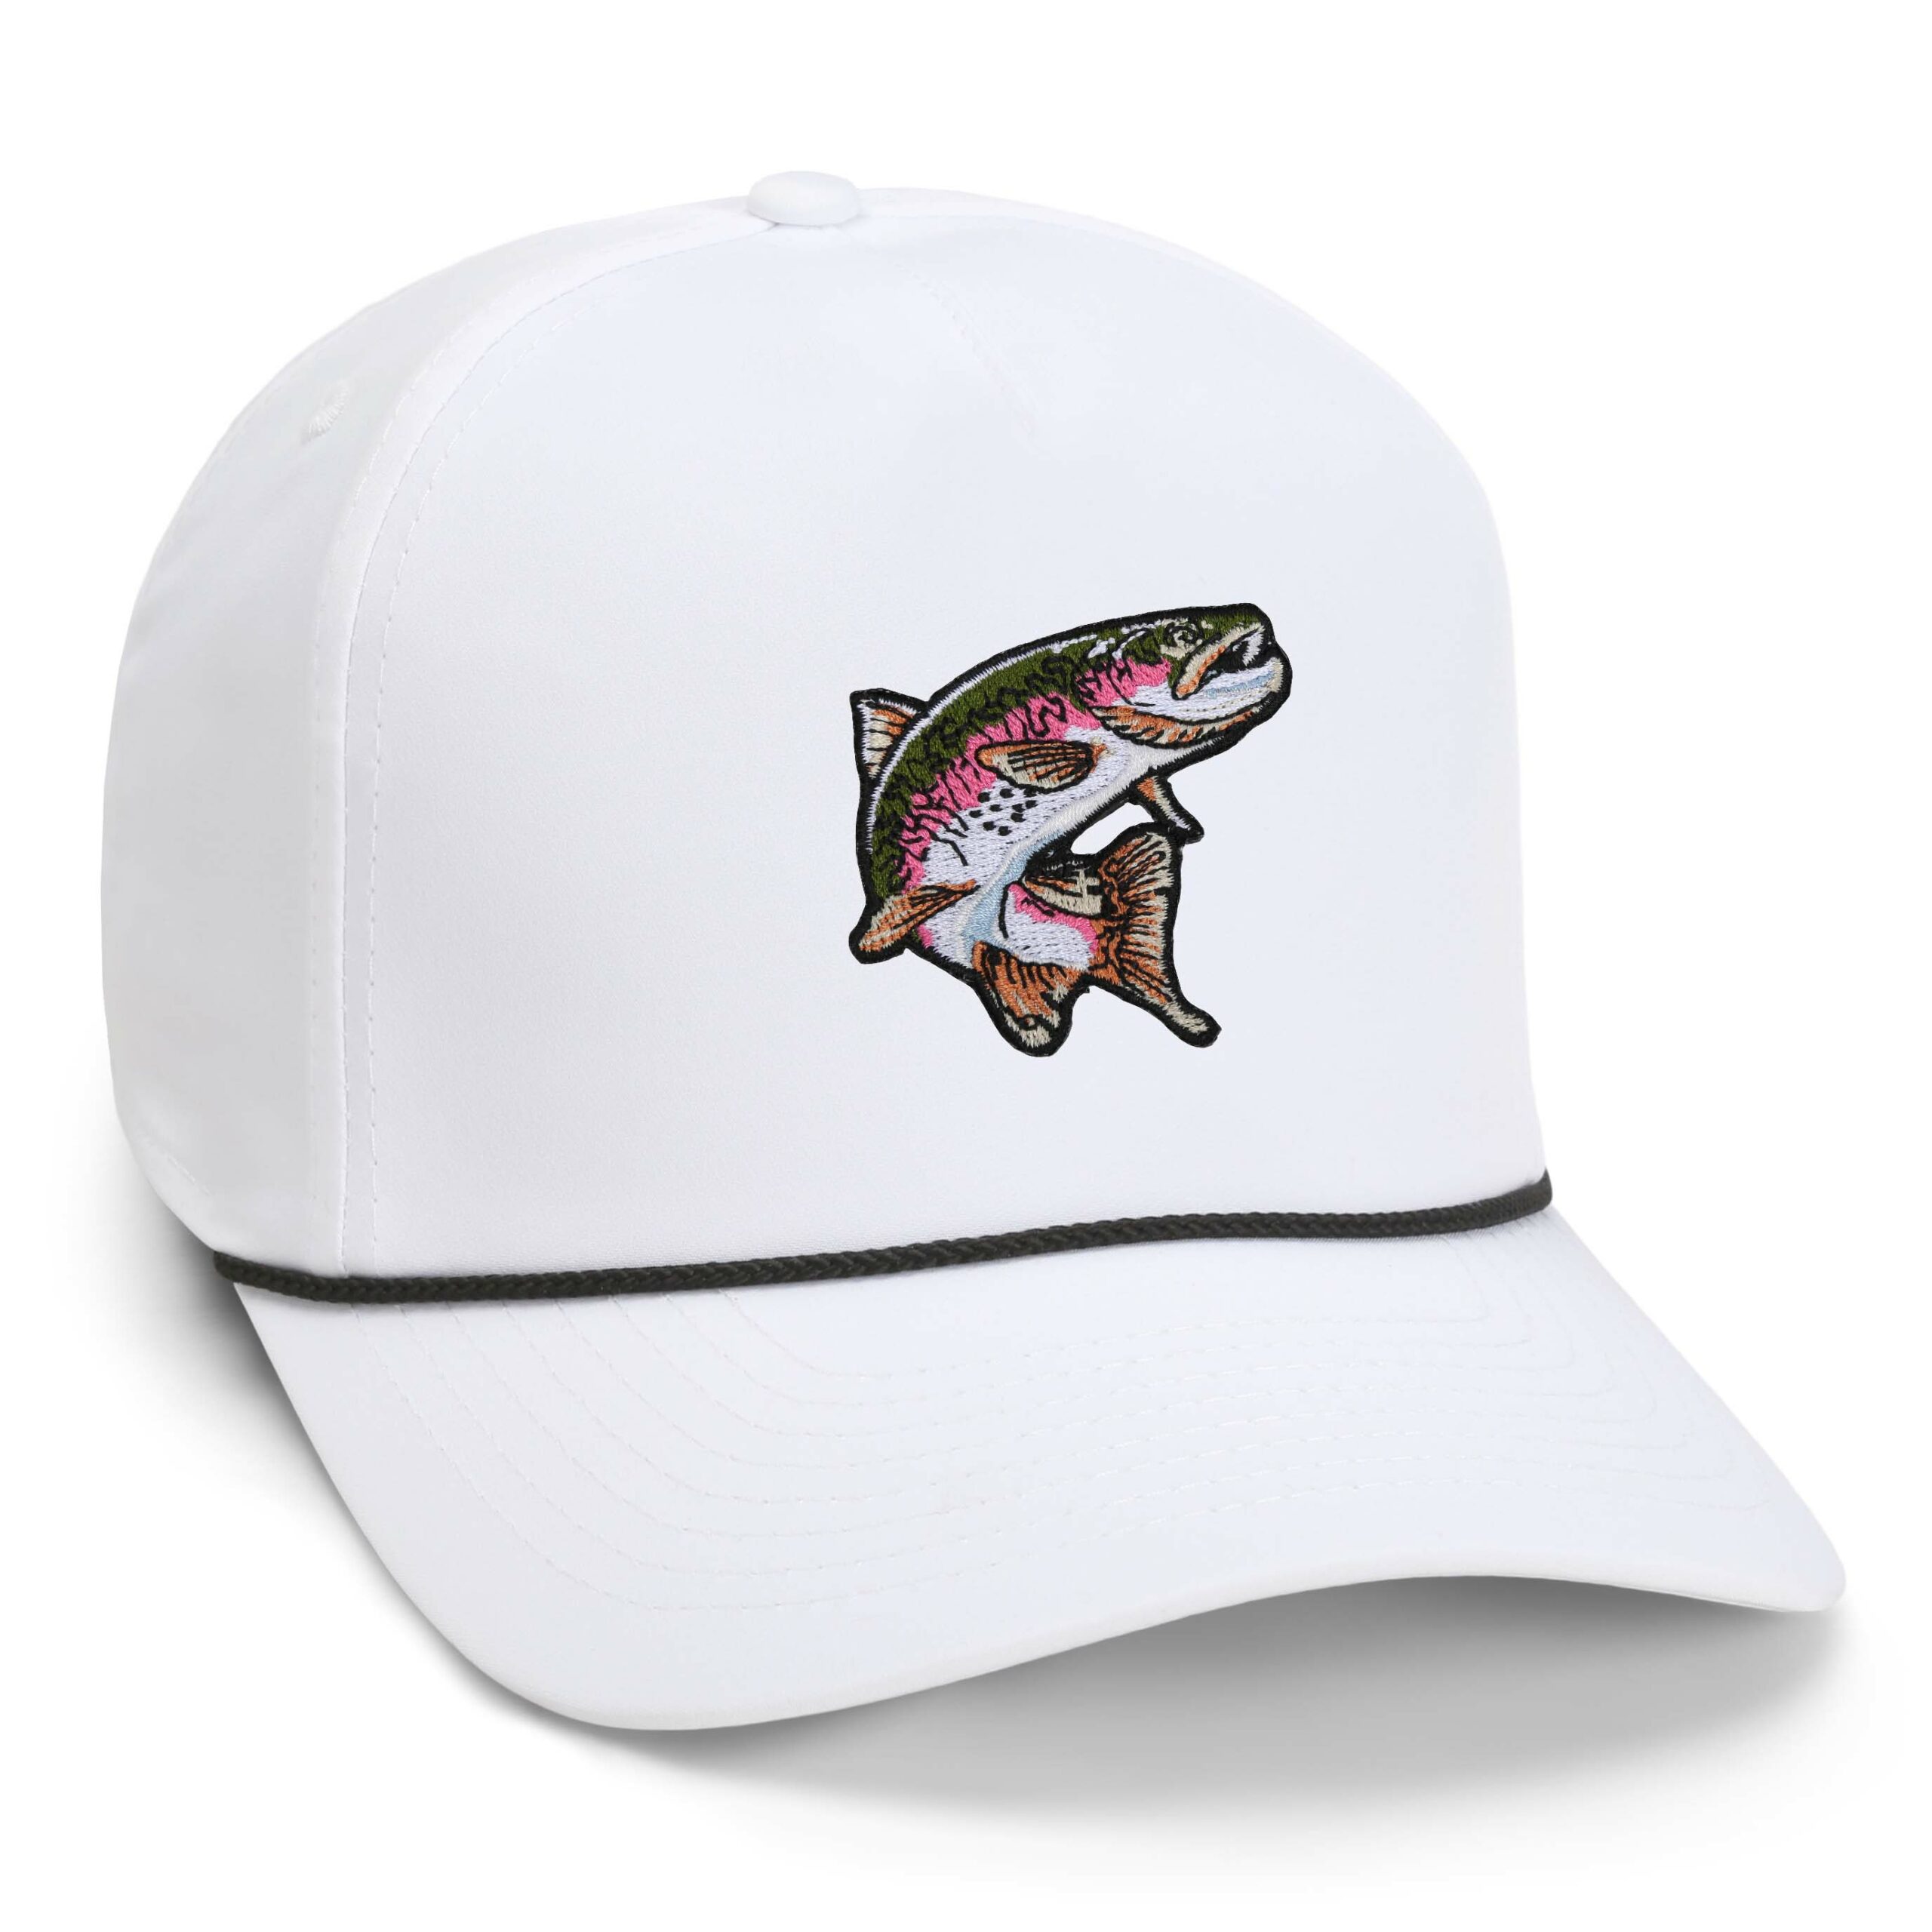 The Rainbow Trout - Performance Rope Cap